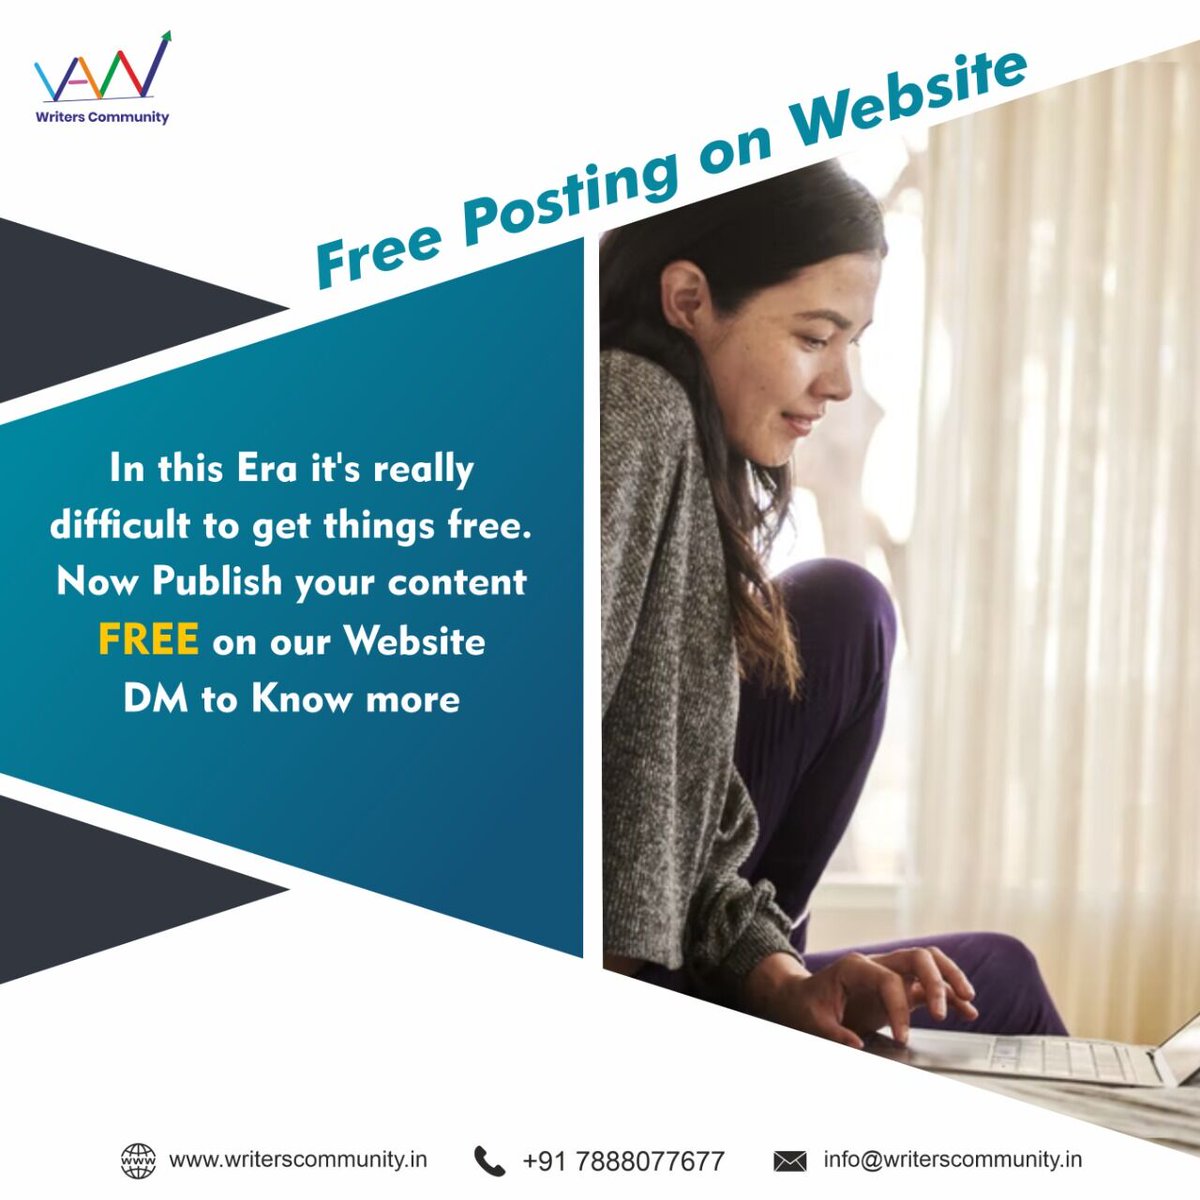 In this Era it's really difficult to get things free. Now Publish your content FREE on our Website DM to Know more' ⠀ #freesubmission #submityourcontent #free